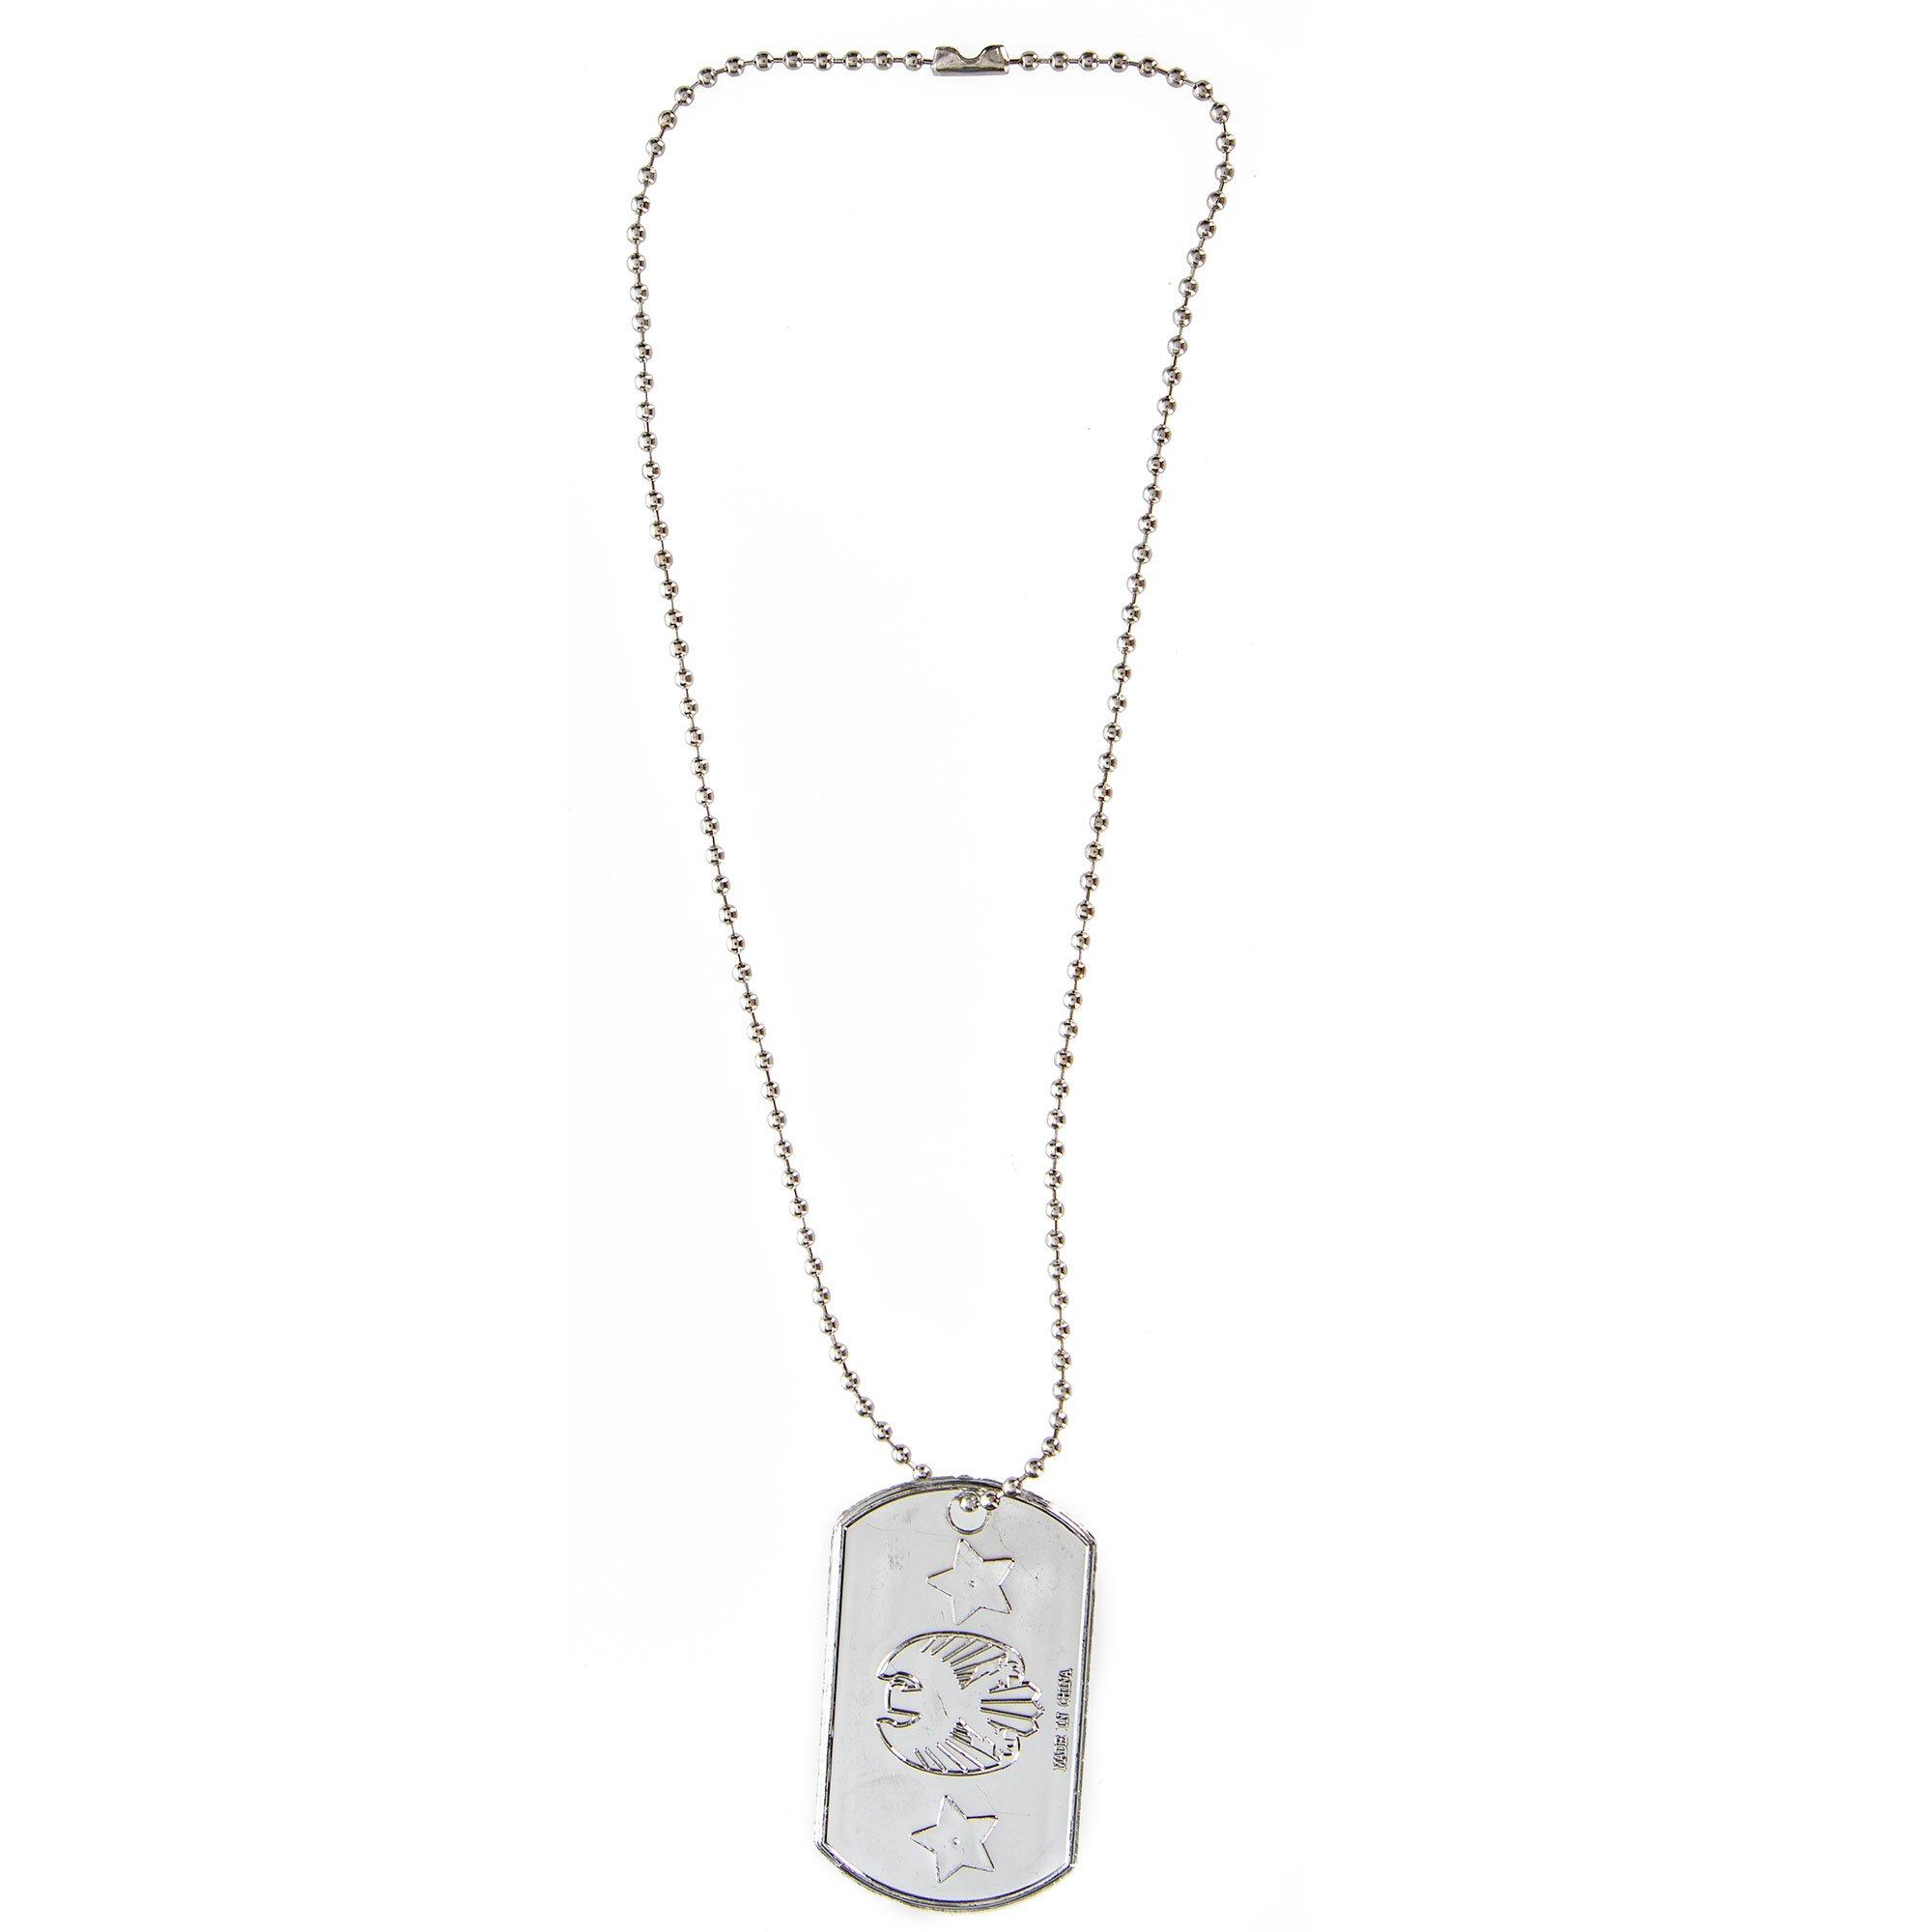 Replacement Silver Dog Tag Chain Set Tactical by Sgt Grit